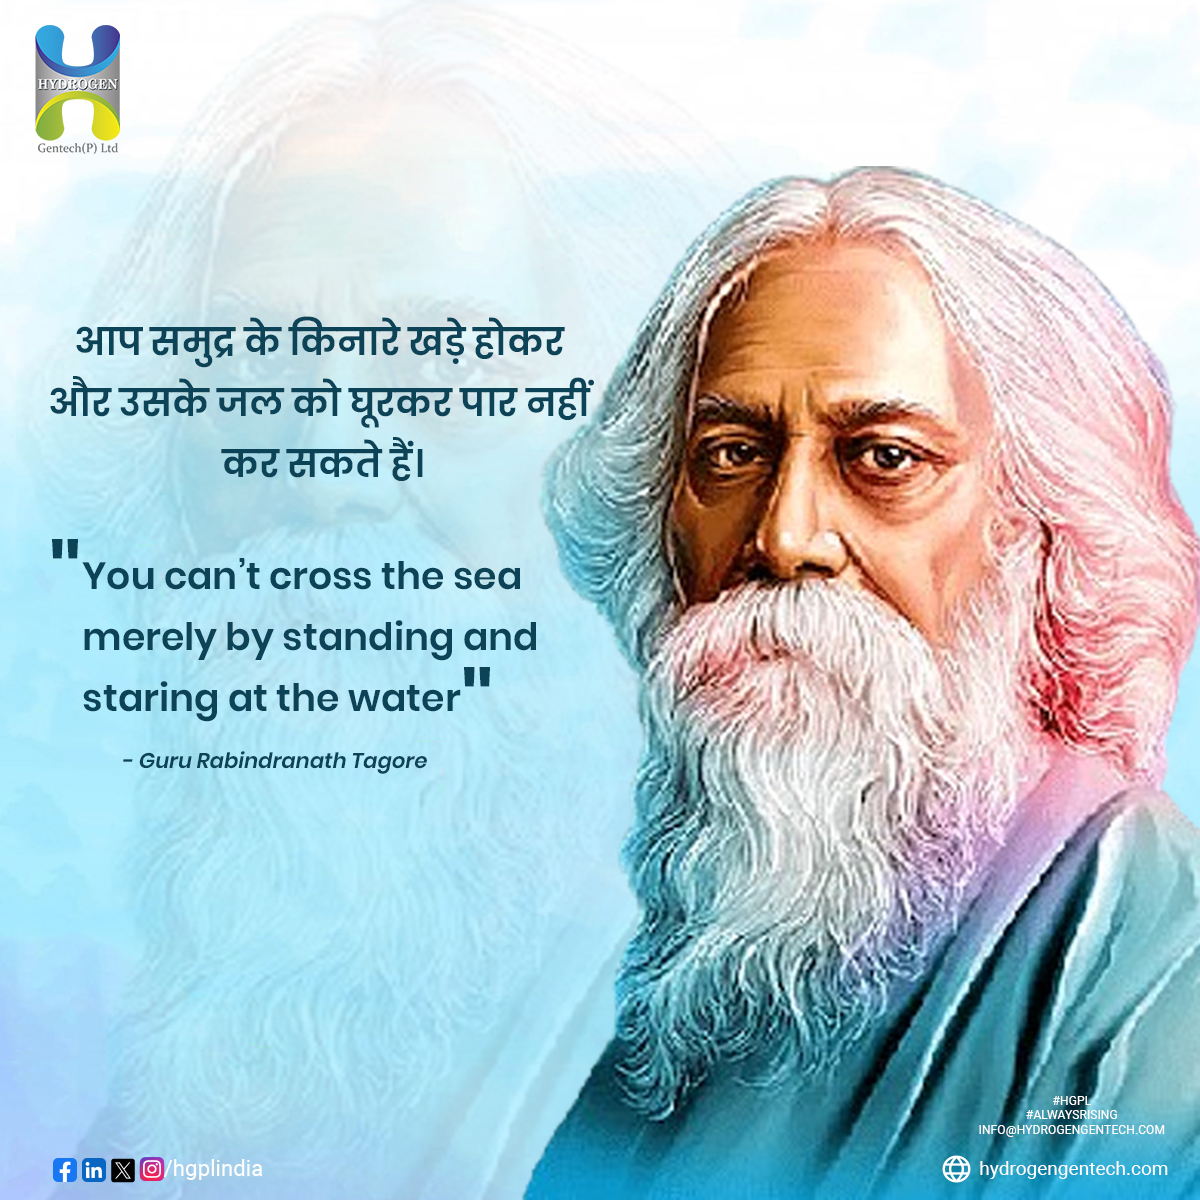 Happy Rabindranath Tagore Jayanti! 🎉 Today, we celebrate the birth anniversary of the legendary poet, writer, and philosopher, Rabindranath Tagore. His profound words and timeless works continue to inspire us across generations. #RabindranathTagoreJayanti #Tagore